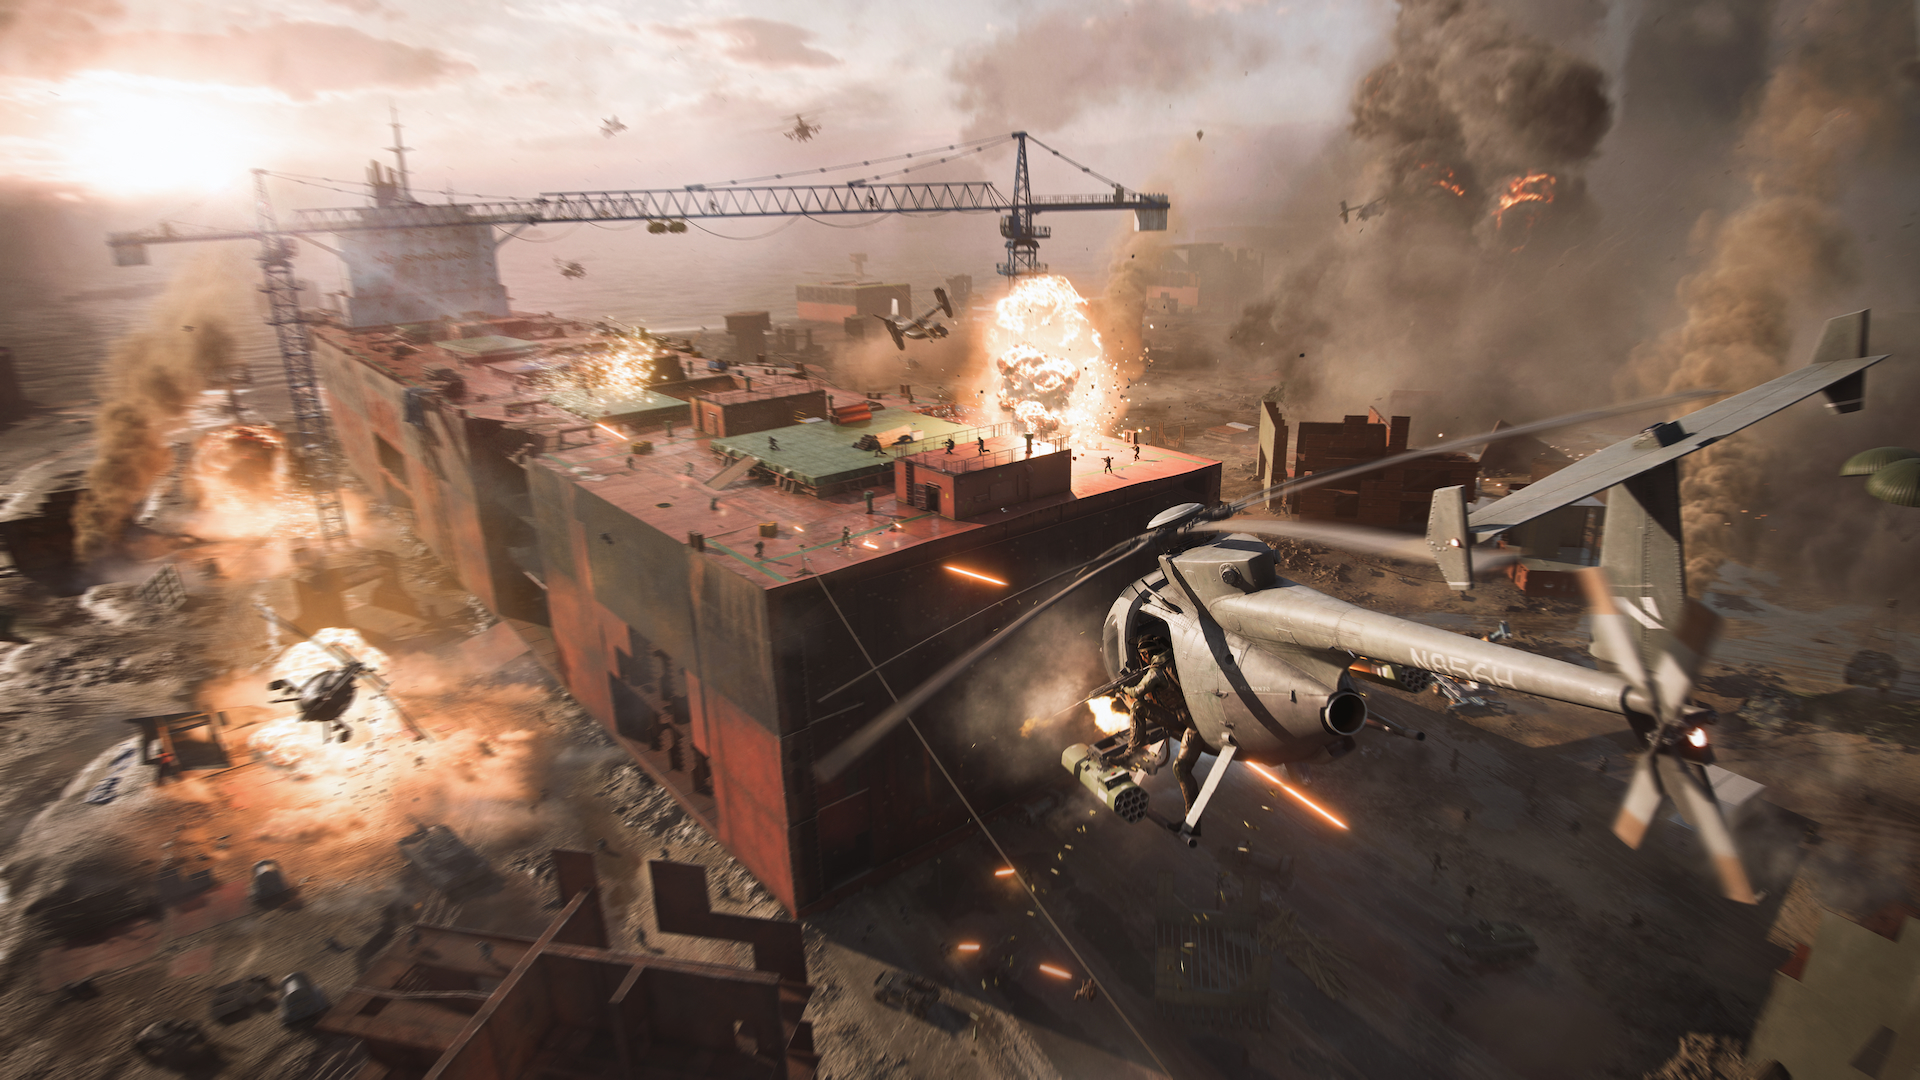 Battlefield 4 features 64-player multiplayer on Xbox One and PS4 - GameSpot